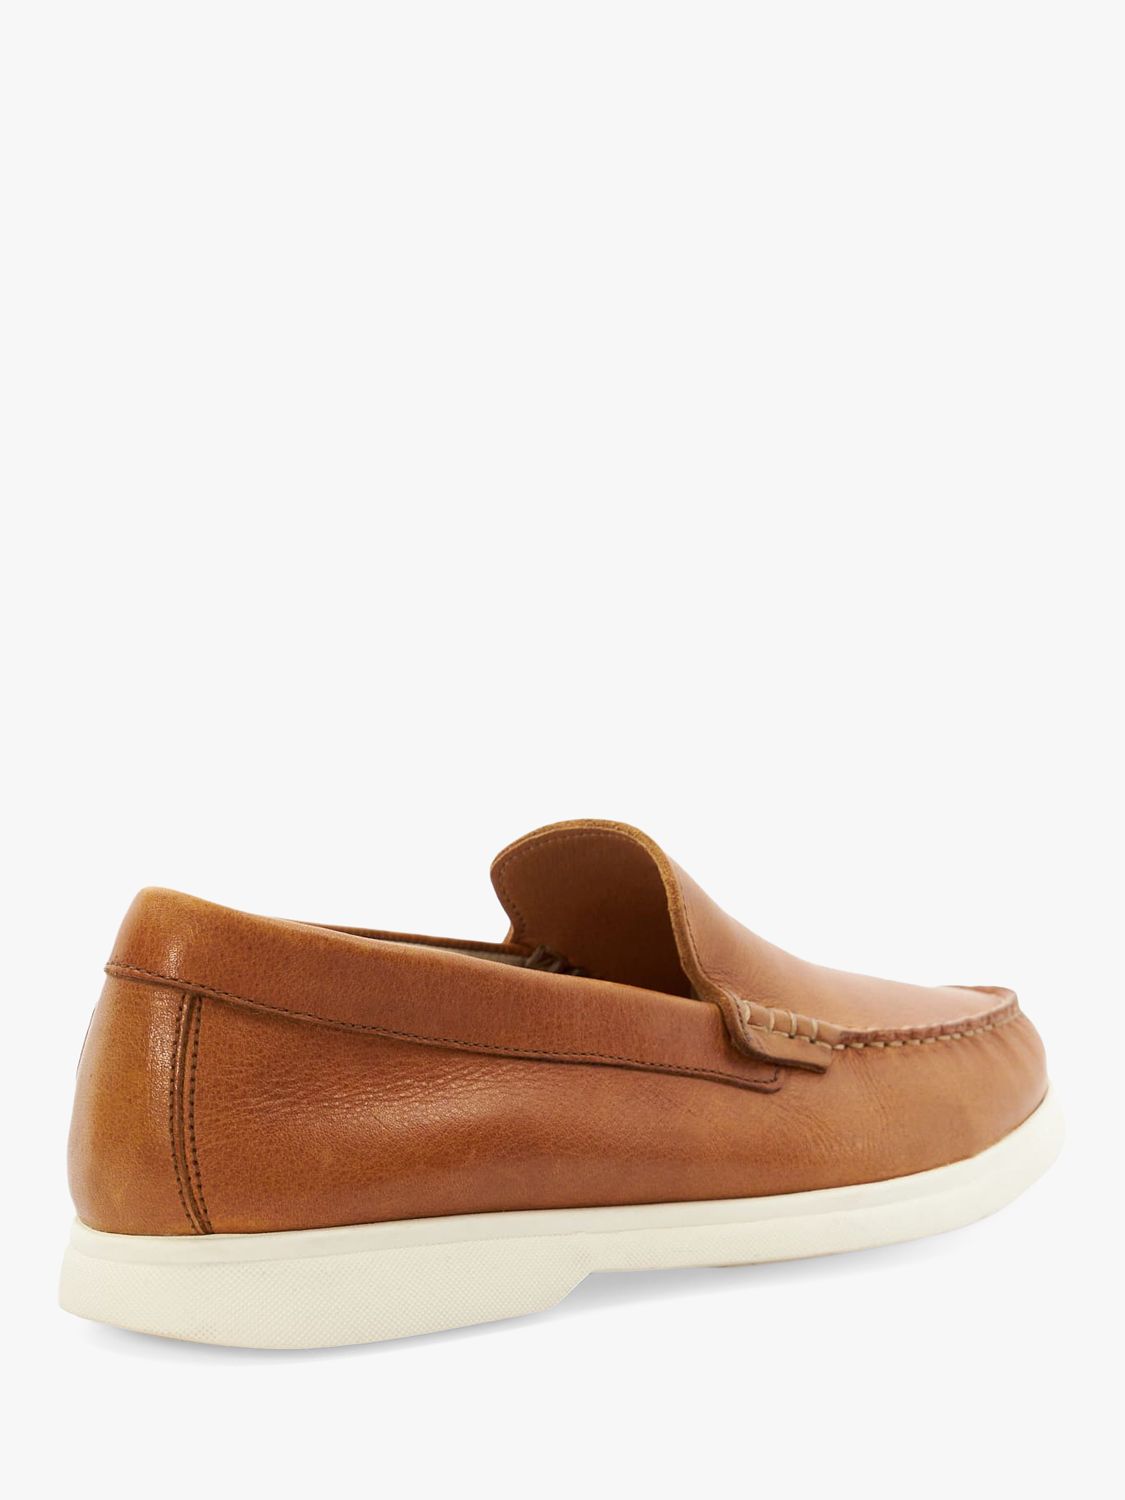 Buy Dune Buftonn Leather Loafers, Tan Online at johnlewis.com